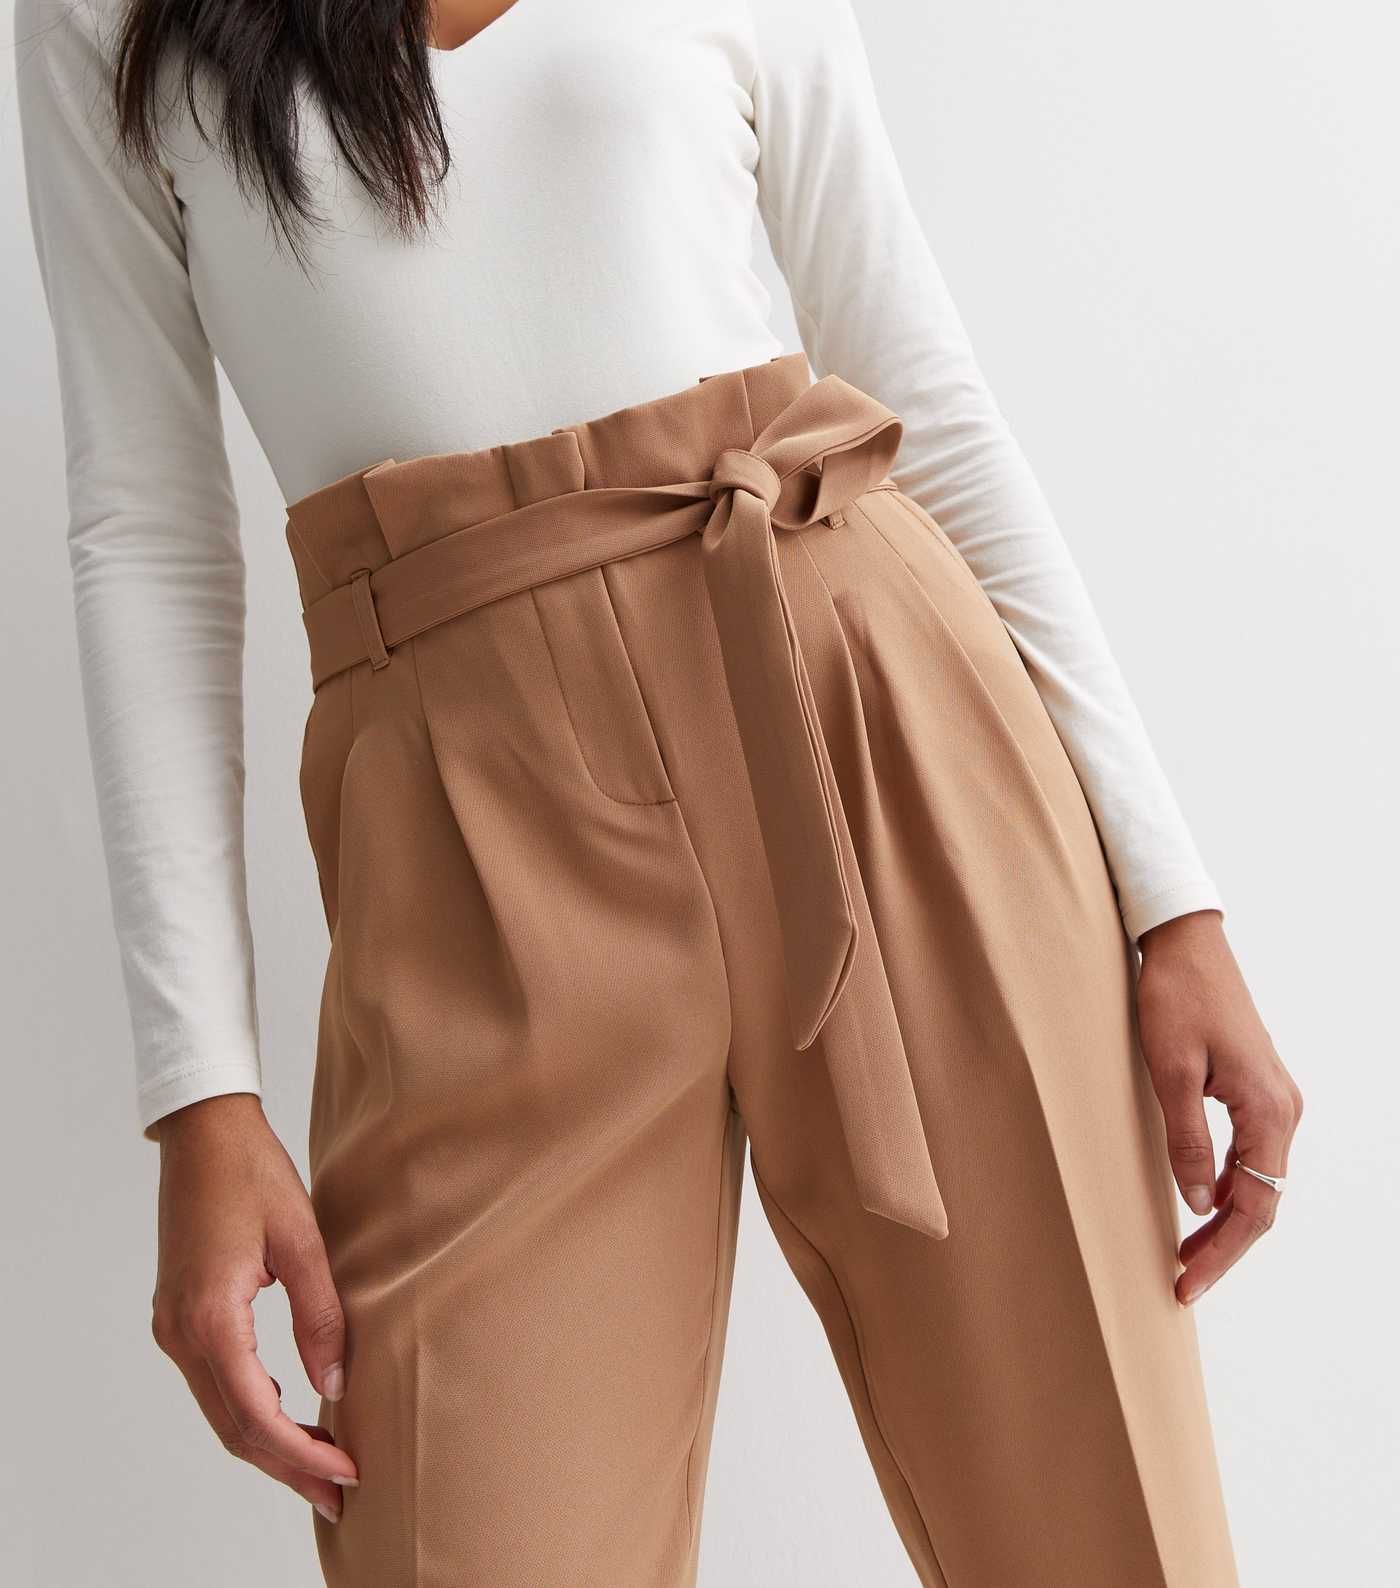 Camel High Waist Paperbag Trousers
						
						Add to Saved Items
						Remove from Saved Items | New Look (UK)